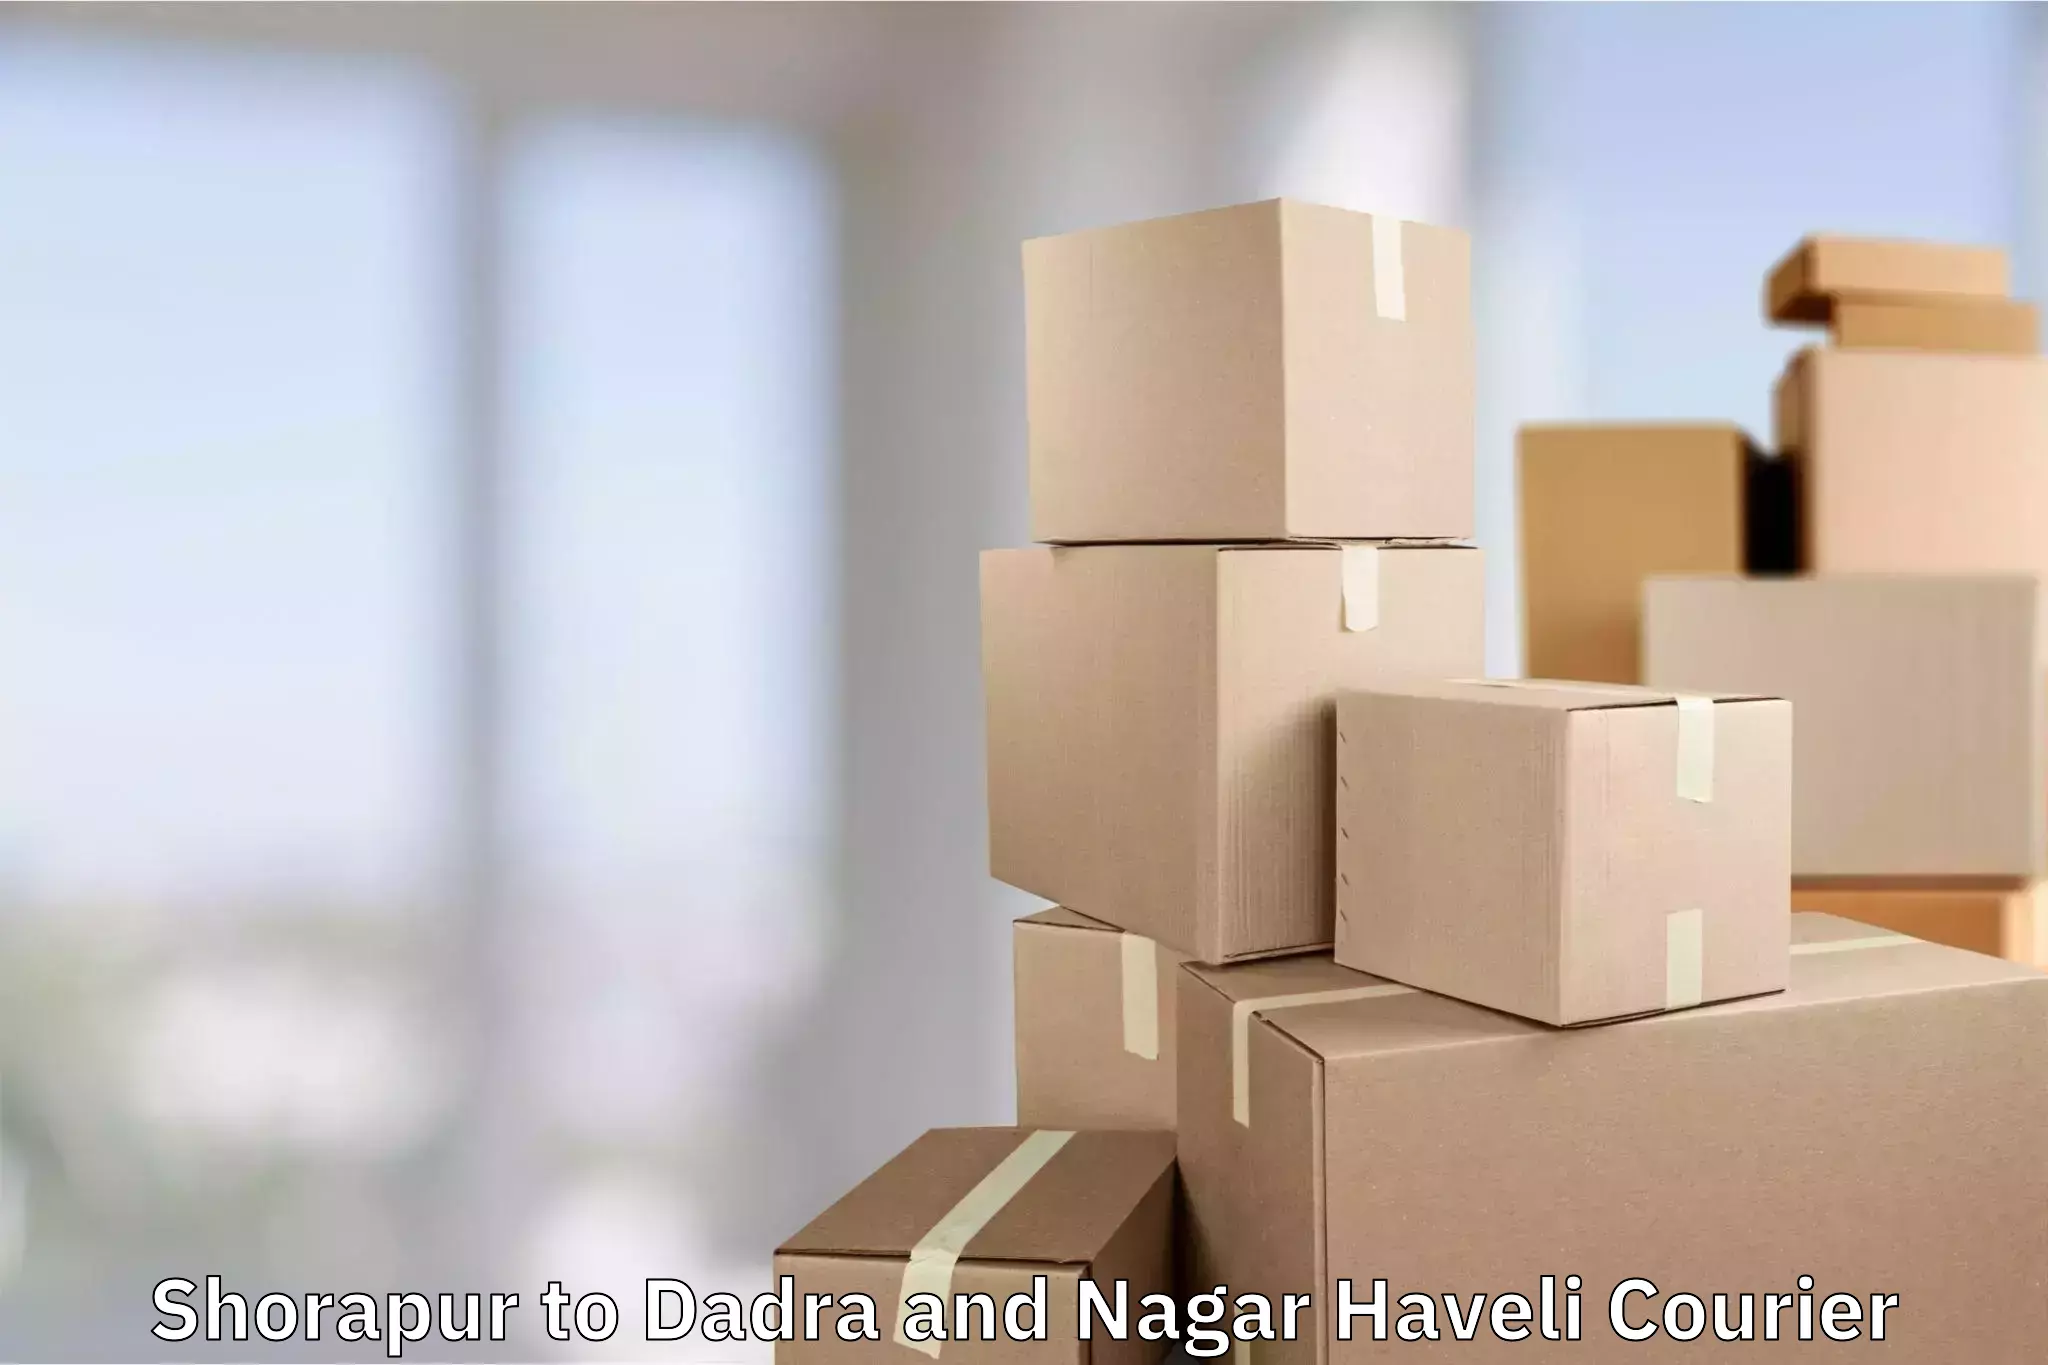 Express luggage delivery in Shorapur to Dadra and Nagar Haveli